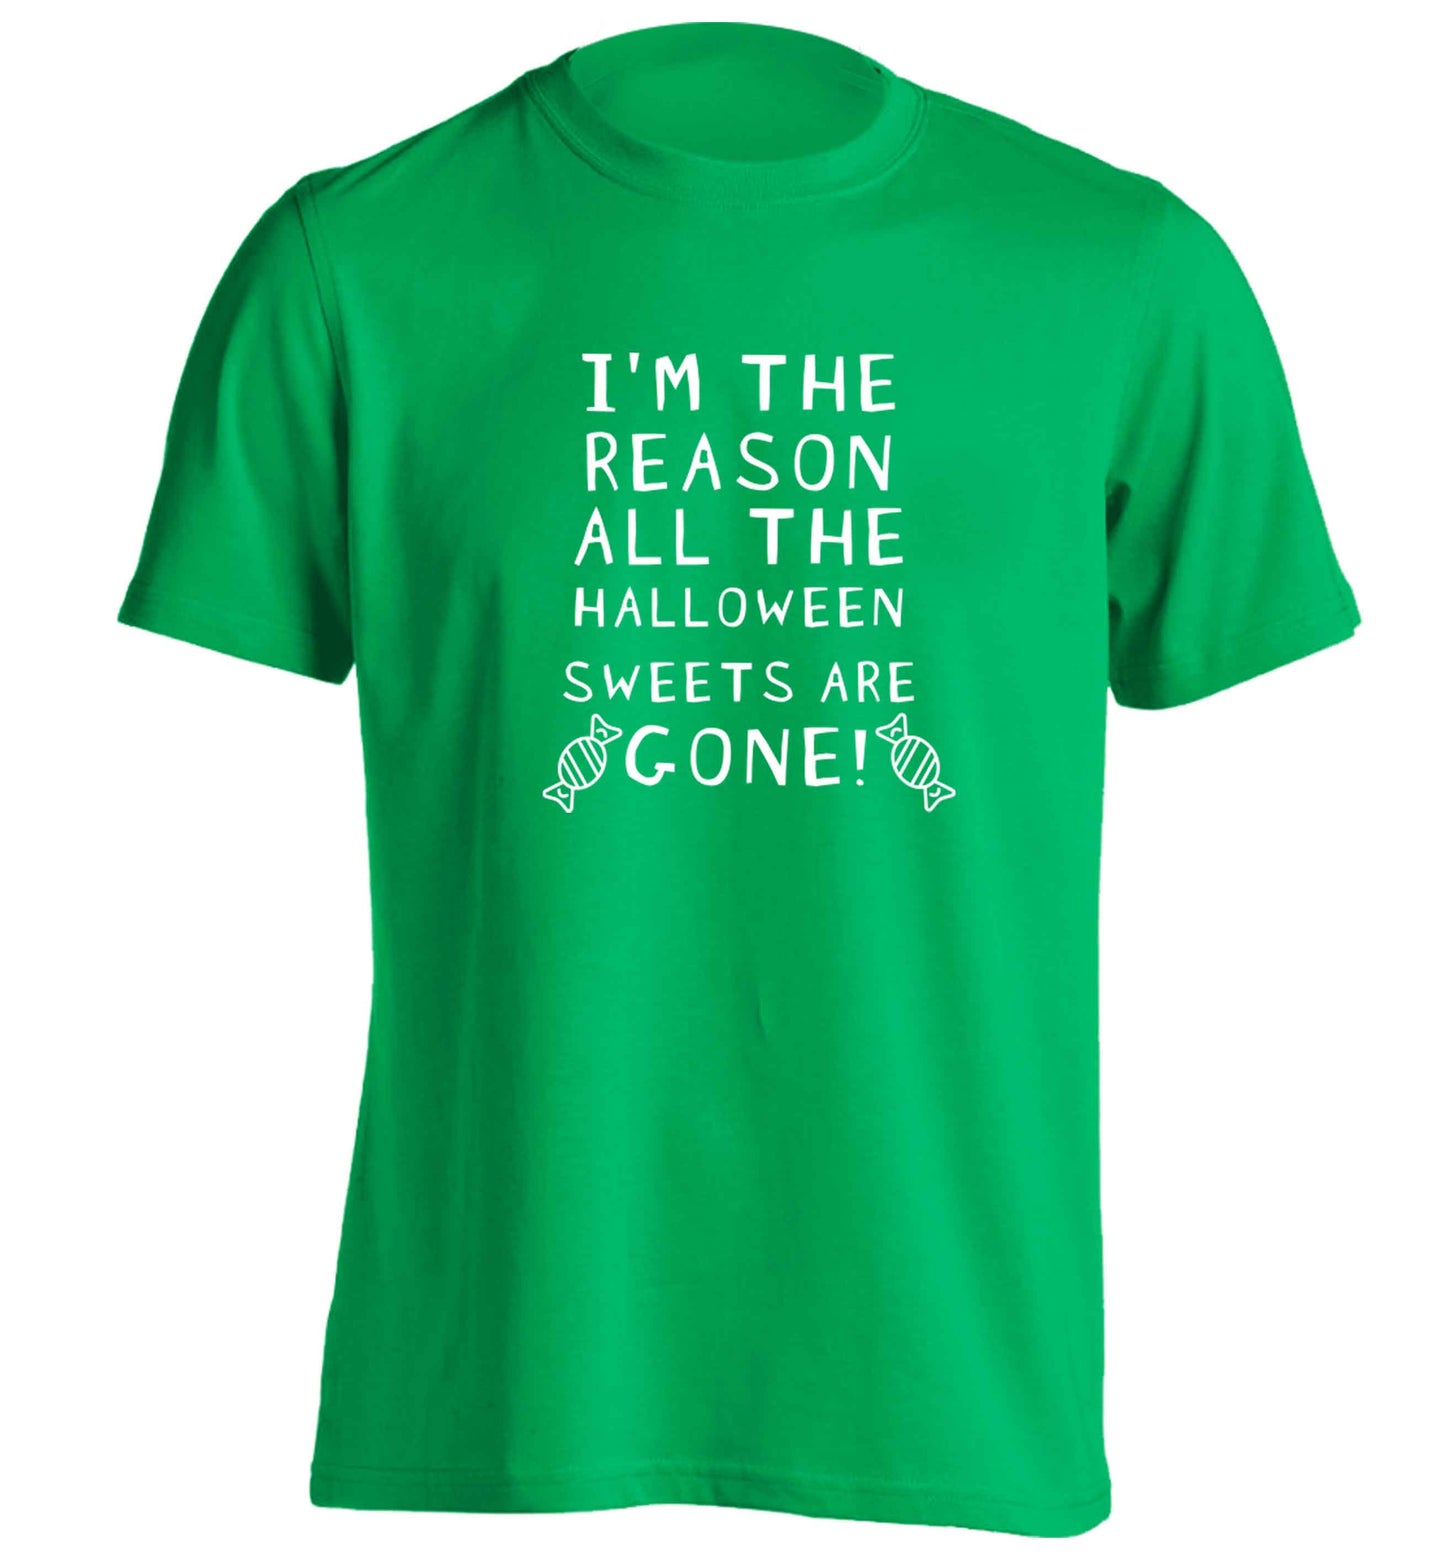 I'm the reason all of the halloween sweets are gone adults unisex green Tshirt 2XL